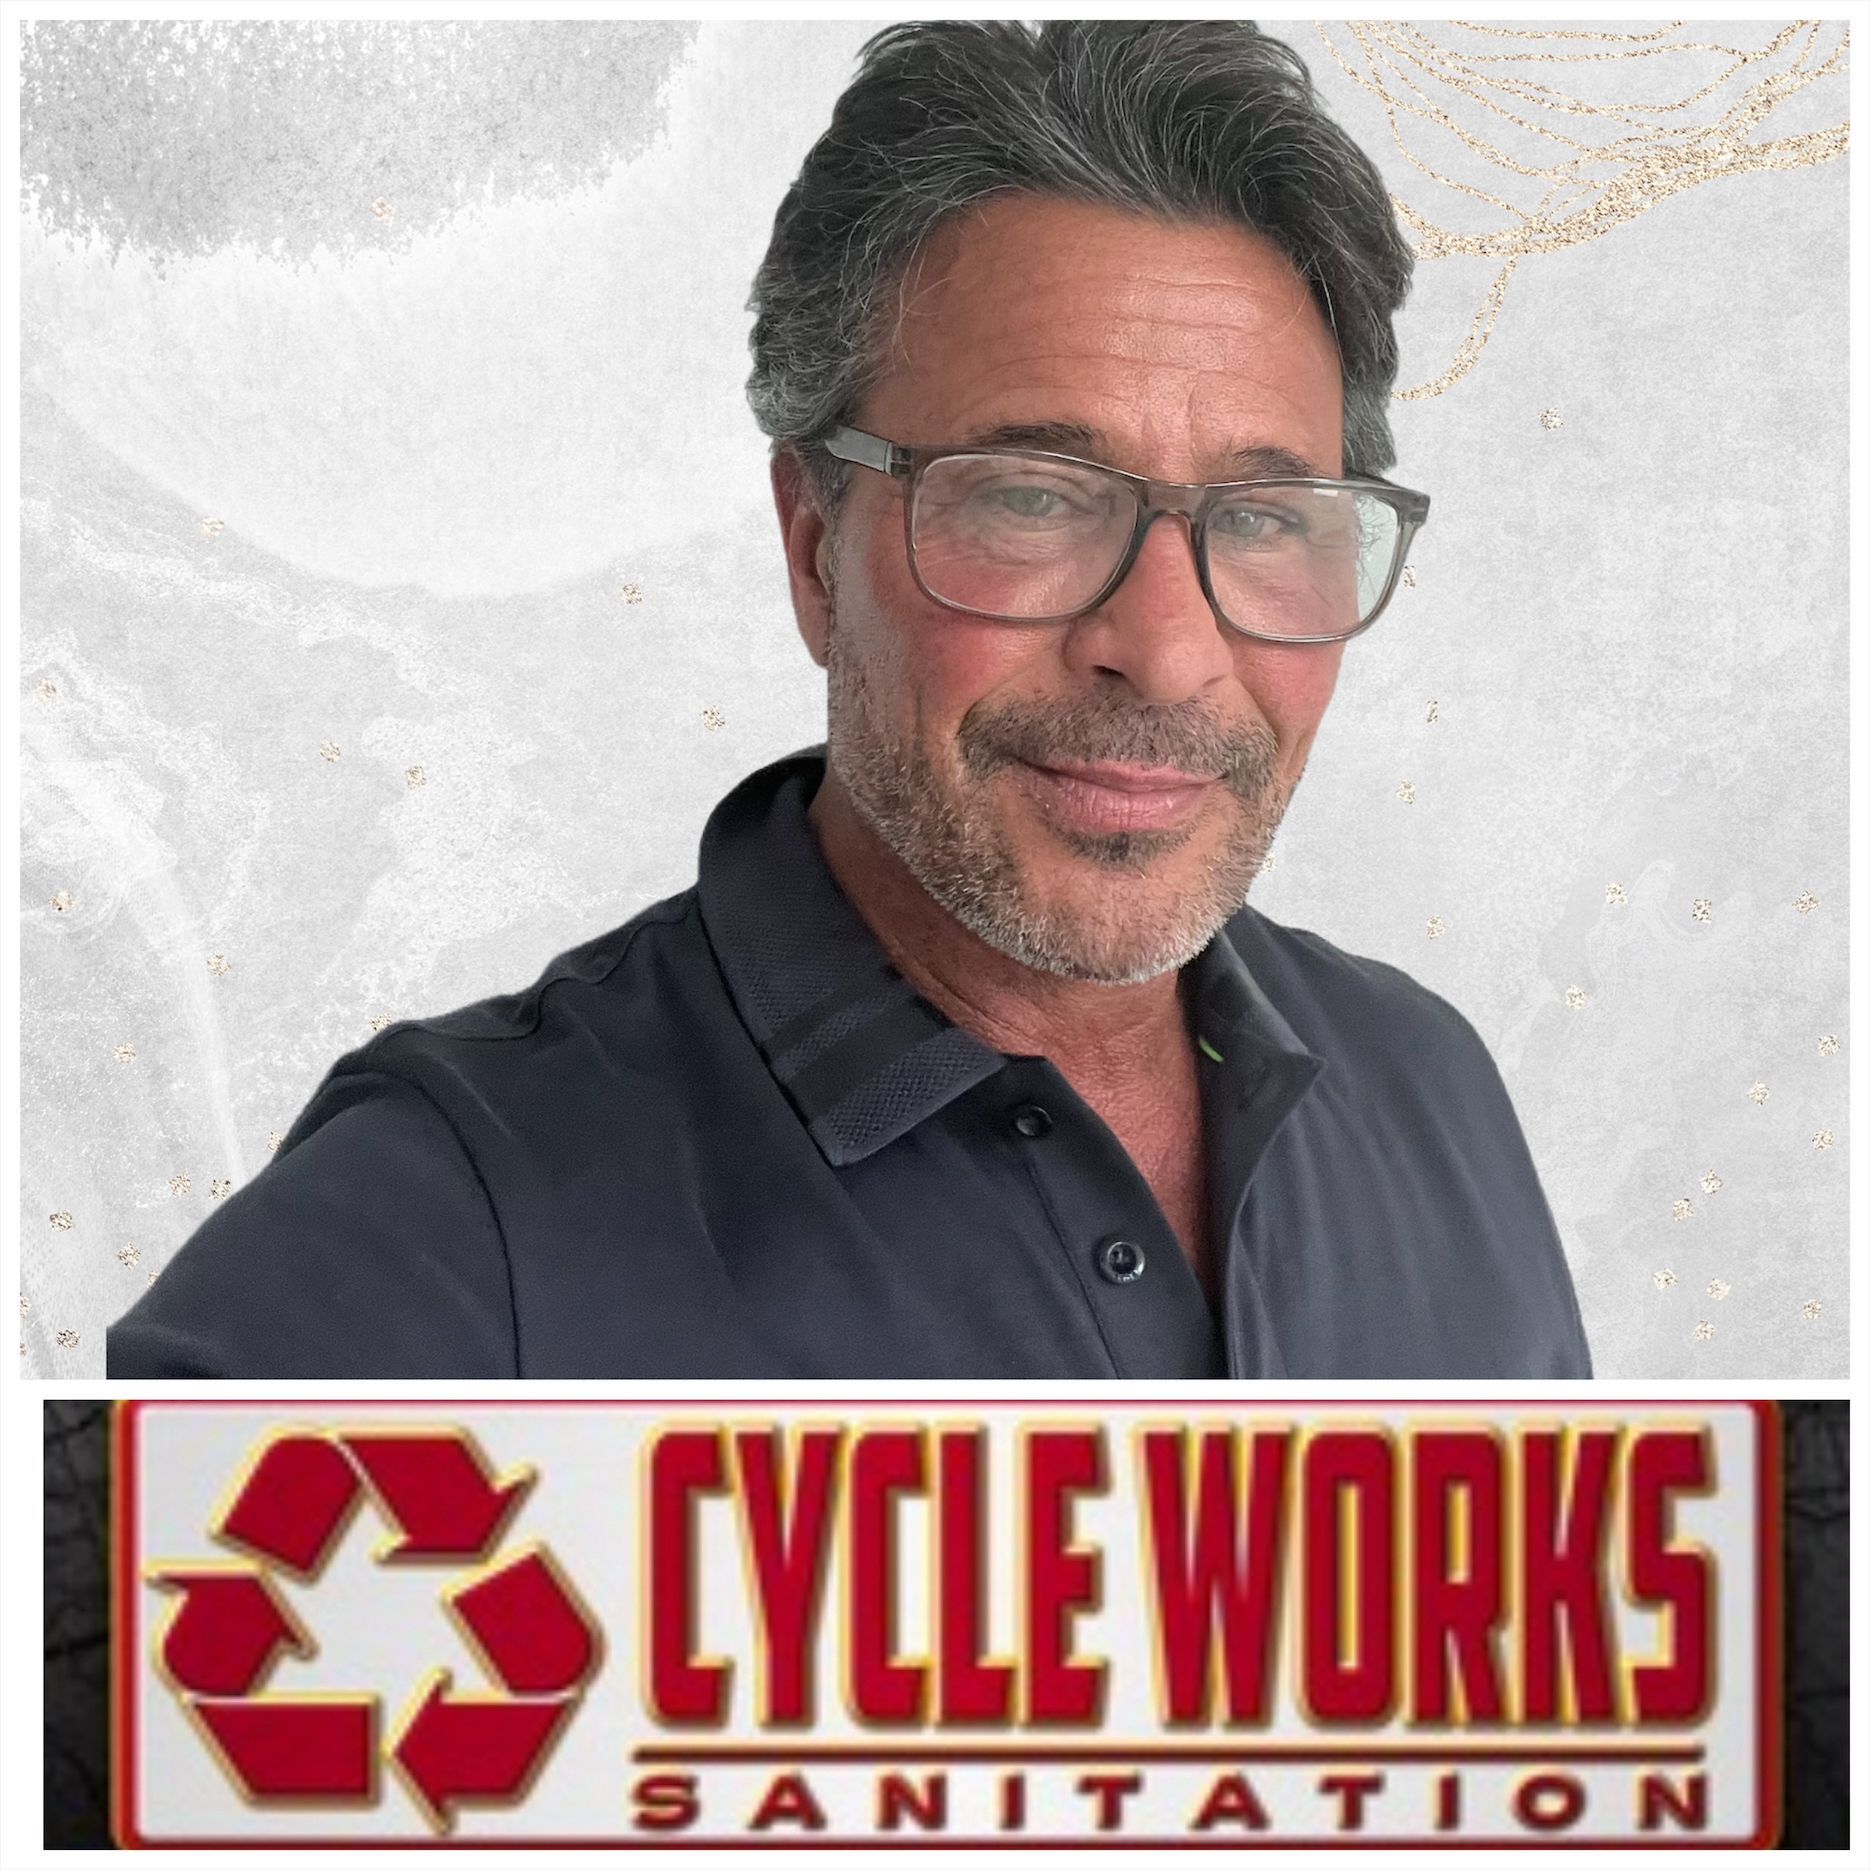 President and Founder of Cycle Works Sanitation — Ball Ground, GA — Cycle Works Sanitation